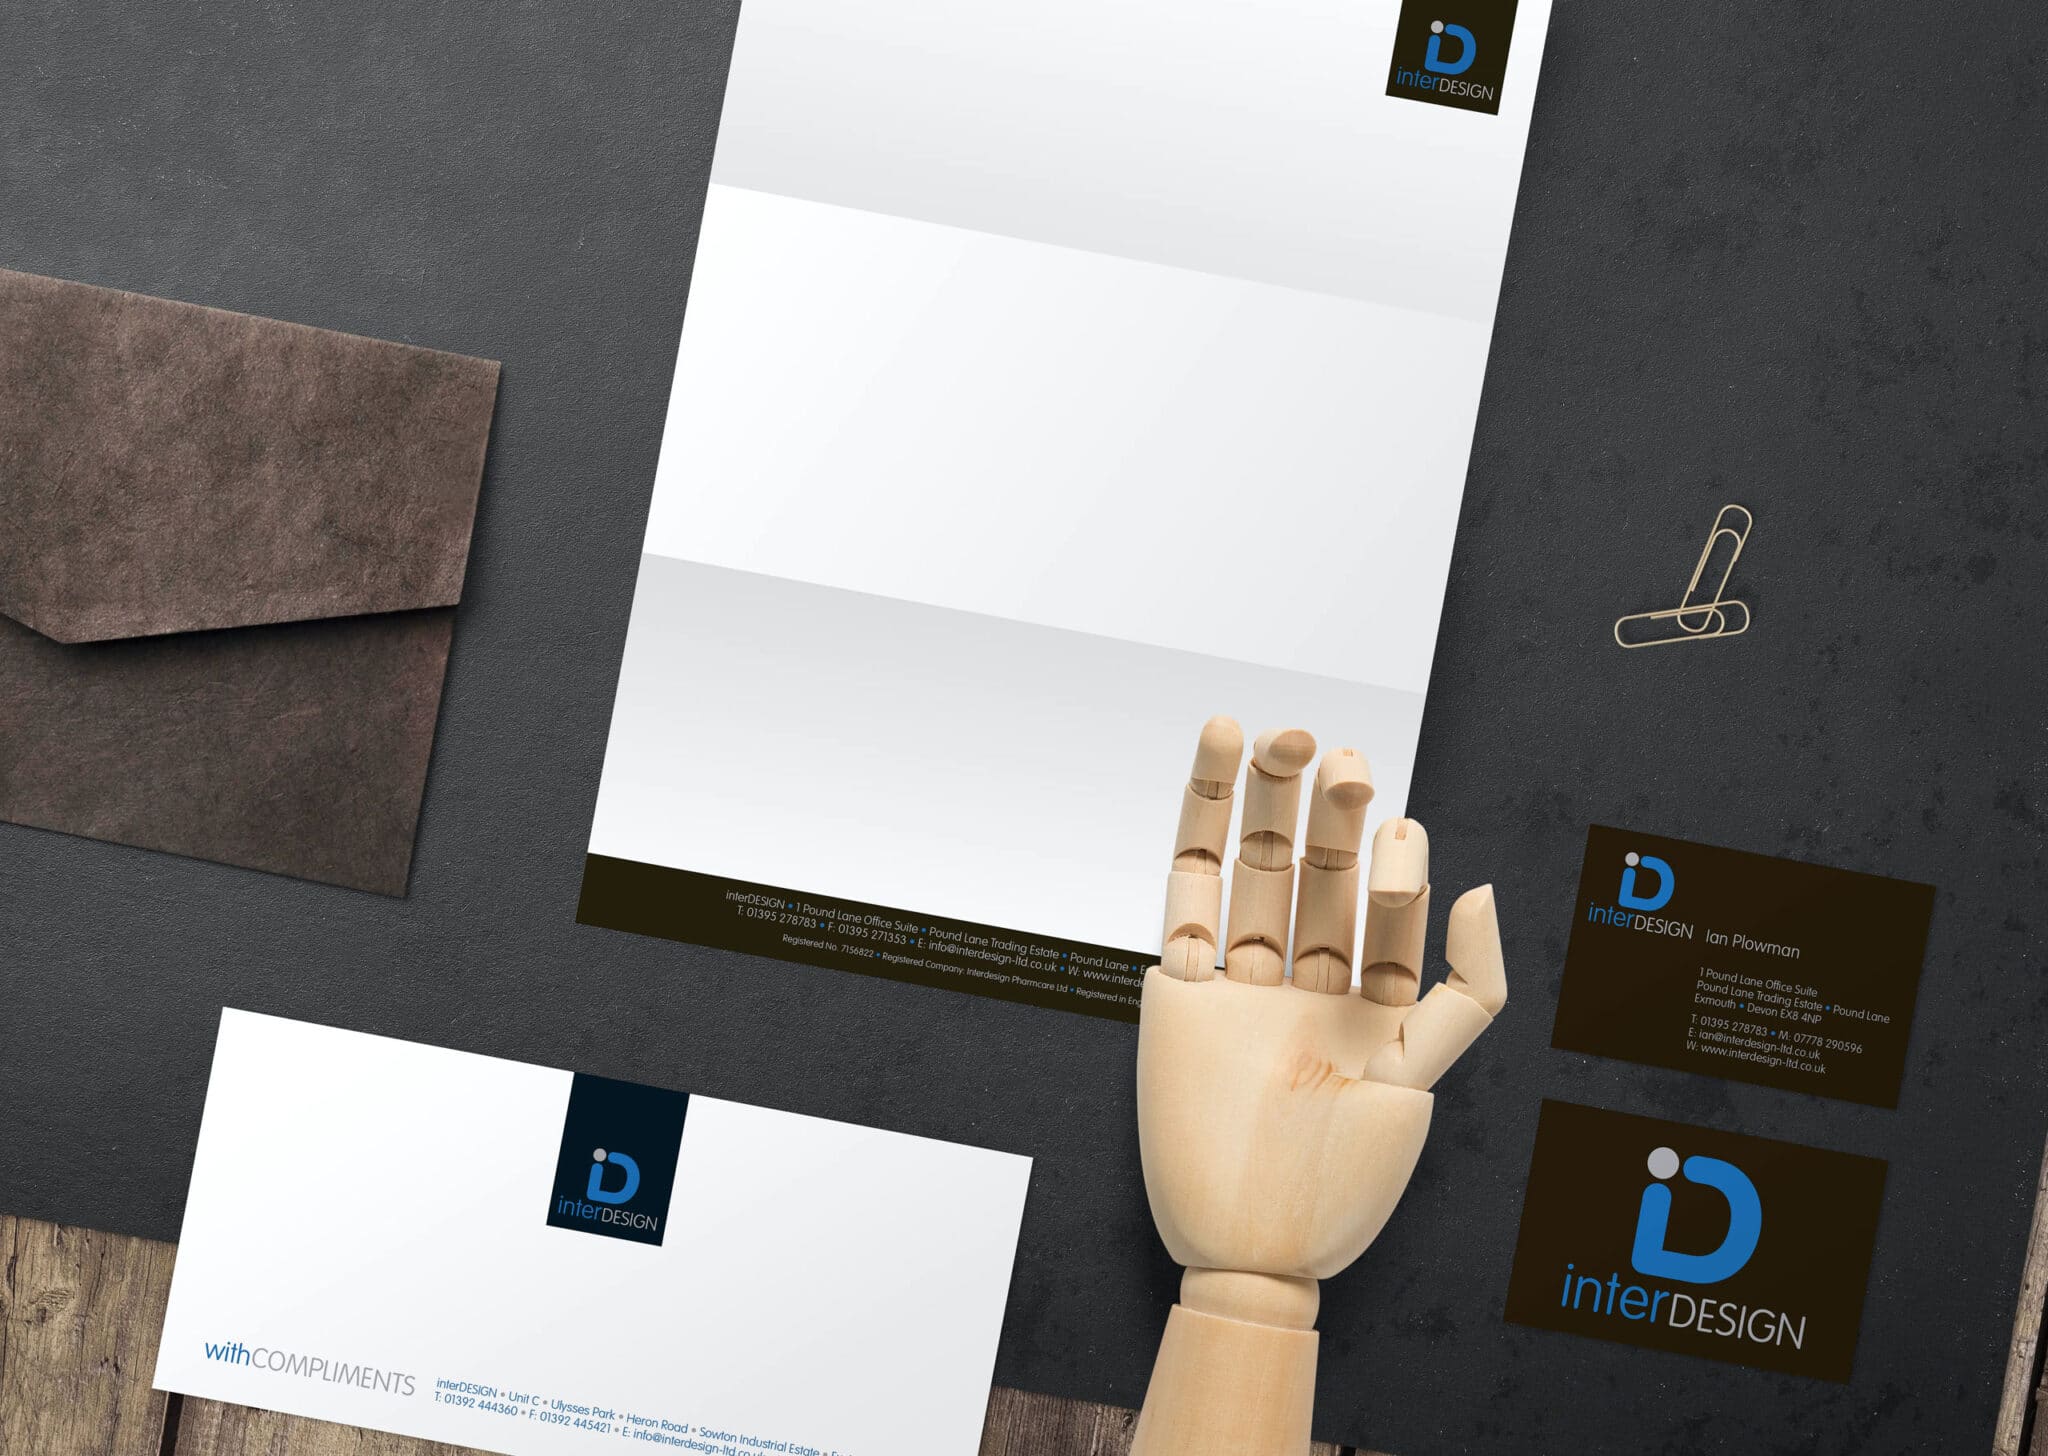 Logo Design And Complete Stationery Design And Print